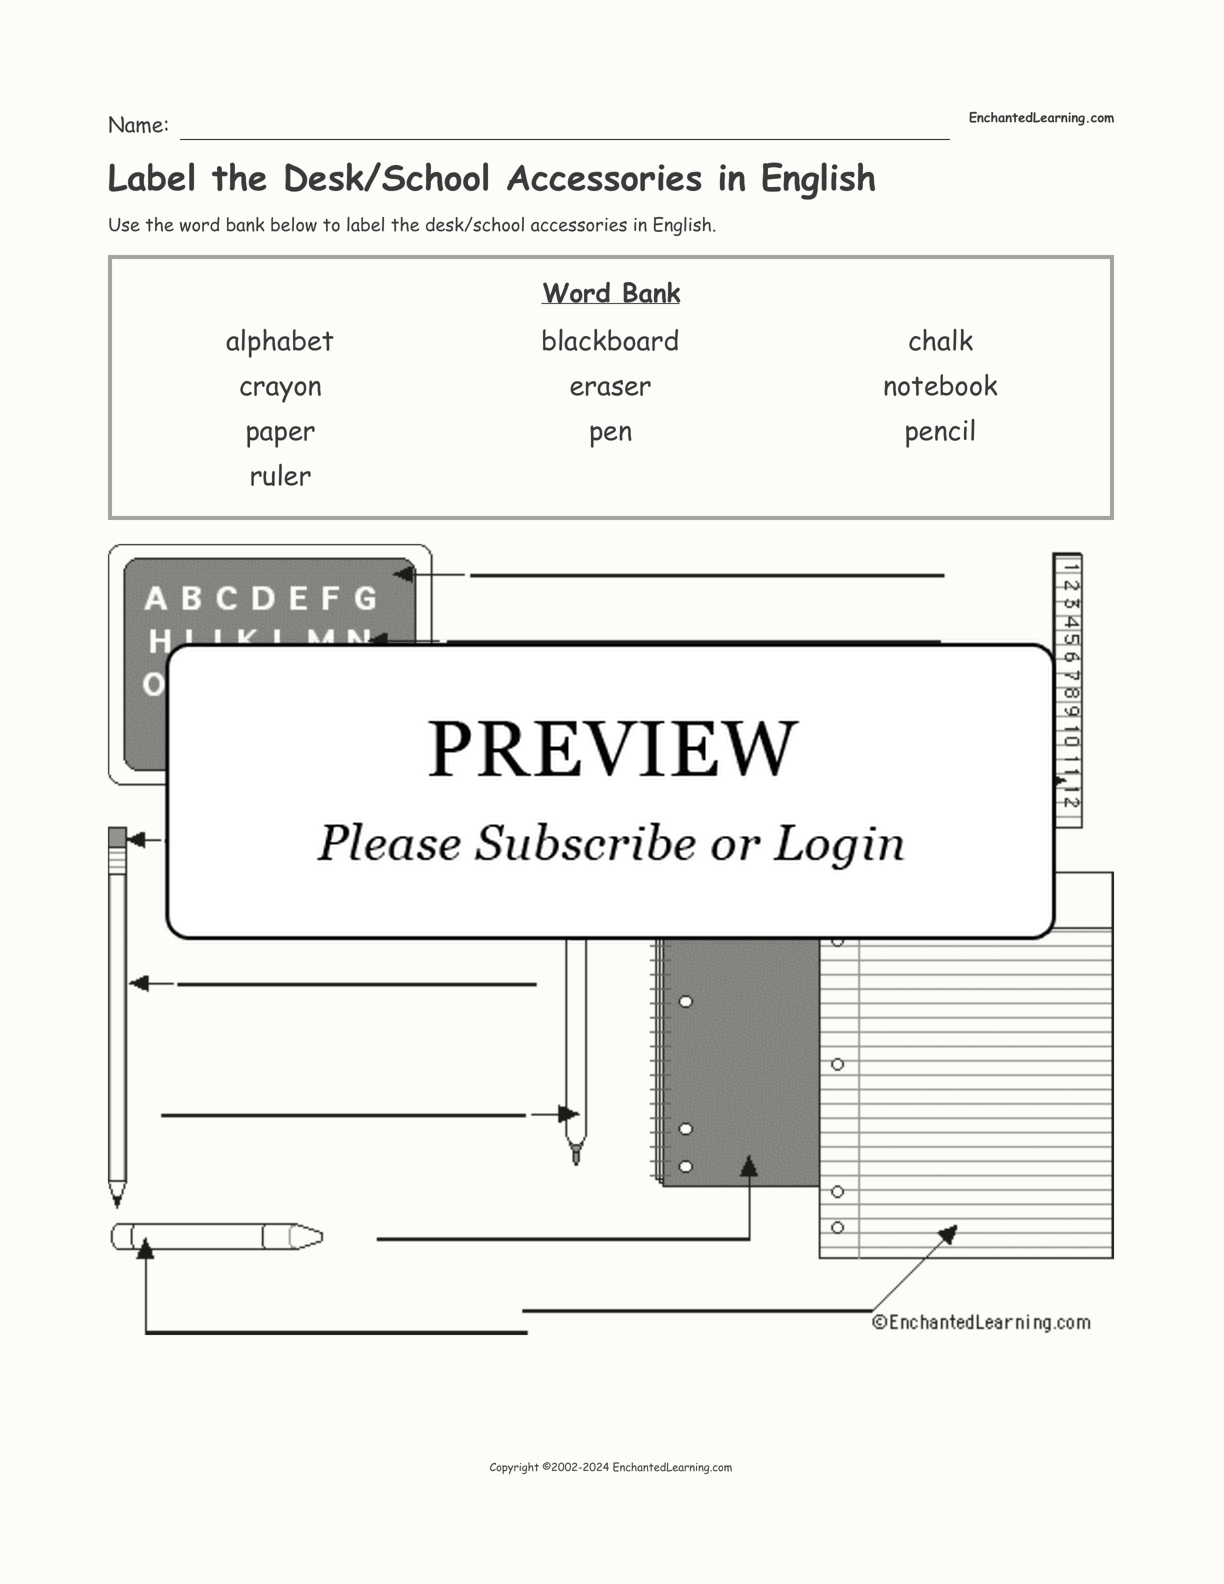 Label the Desk/School Accessories in English interactive worksheet page 1